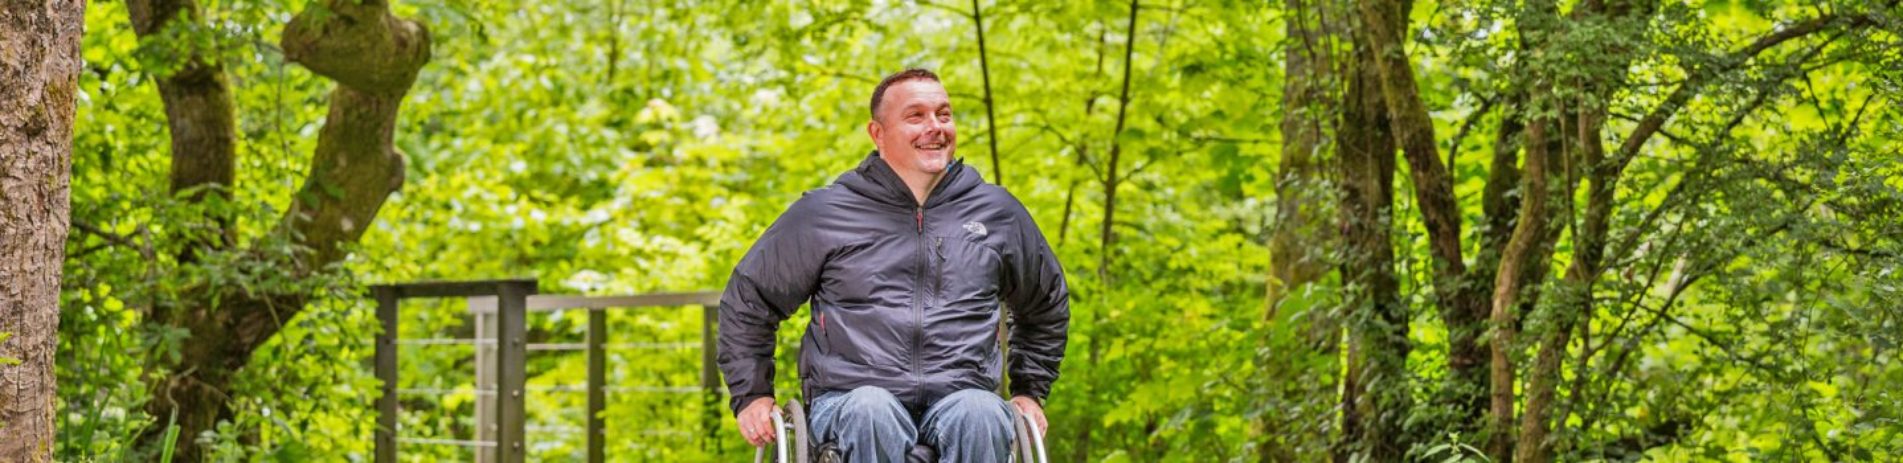 man-in-wheelchair-in-grey-jacket-and-jeans-smiling-surrounded-by-lush-forest-canopy